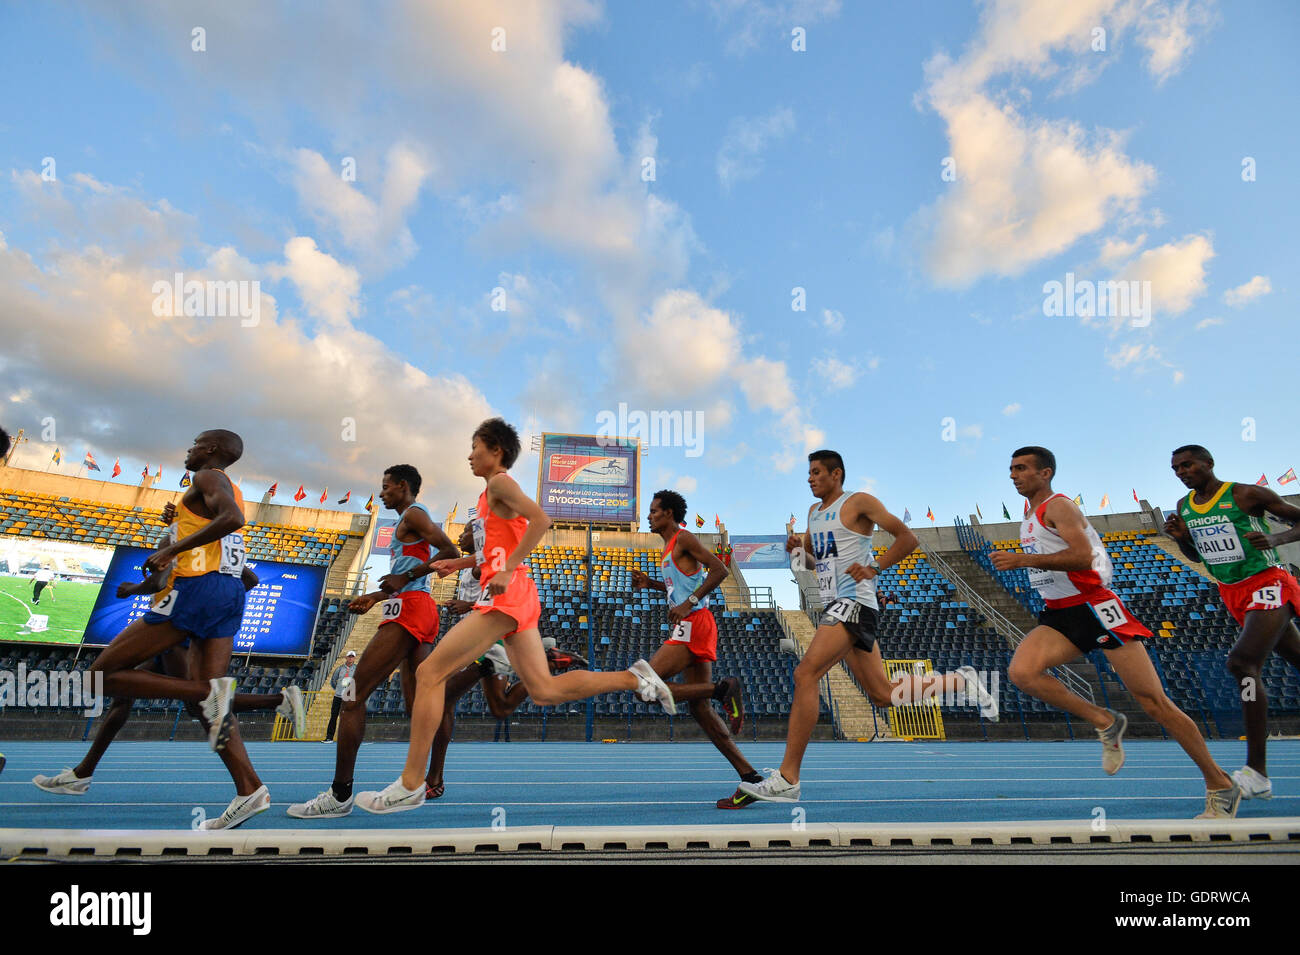 Bydgoszcz, Poland. 19th July, 2016. athletes in the mens 10000m final during the afternoon session on day 1 of the IAAF World Junior Championships at Zawisza Stadium on July 19, 2016 in Bydgoszcz, Poland. Credit:  Roger Sedres/Alamy Live News Stock Photo